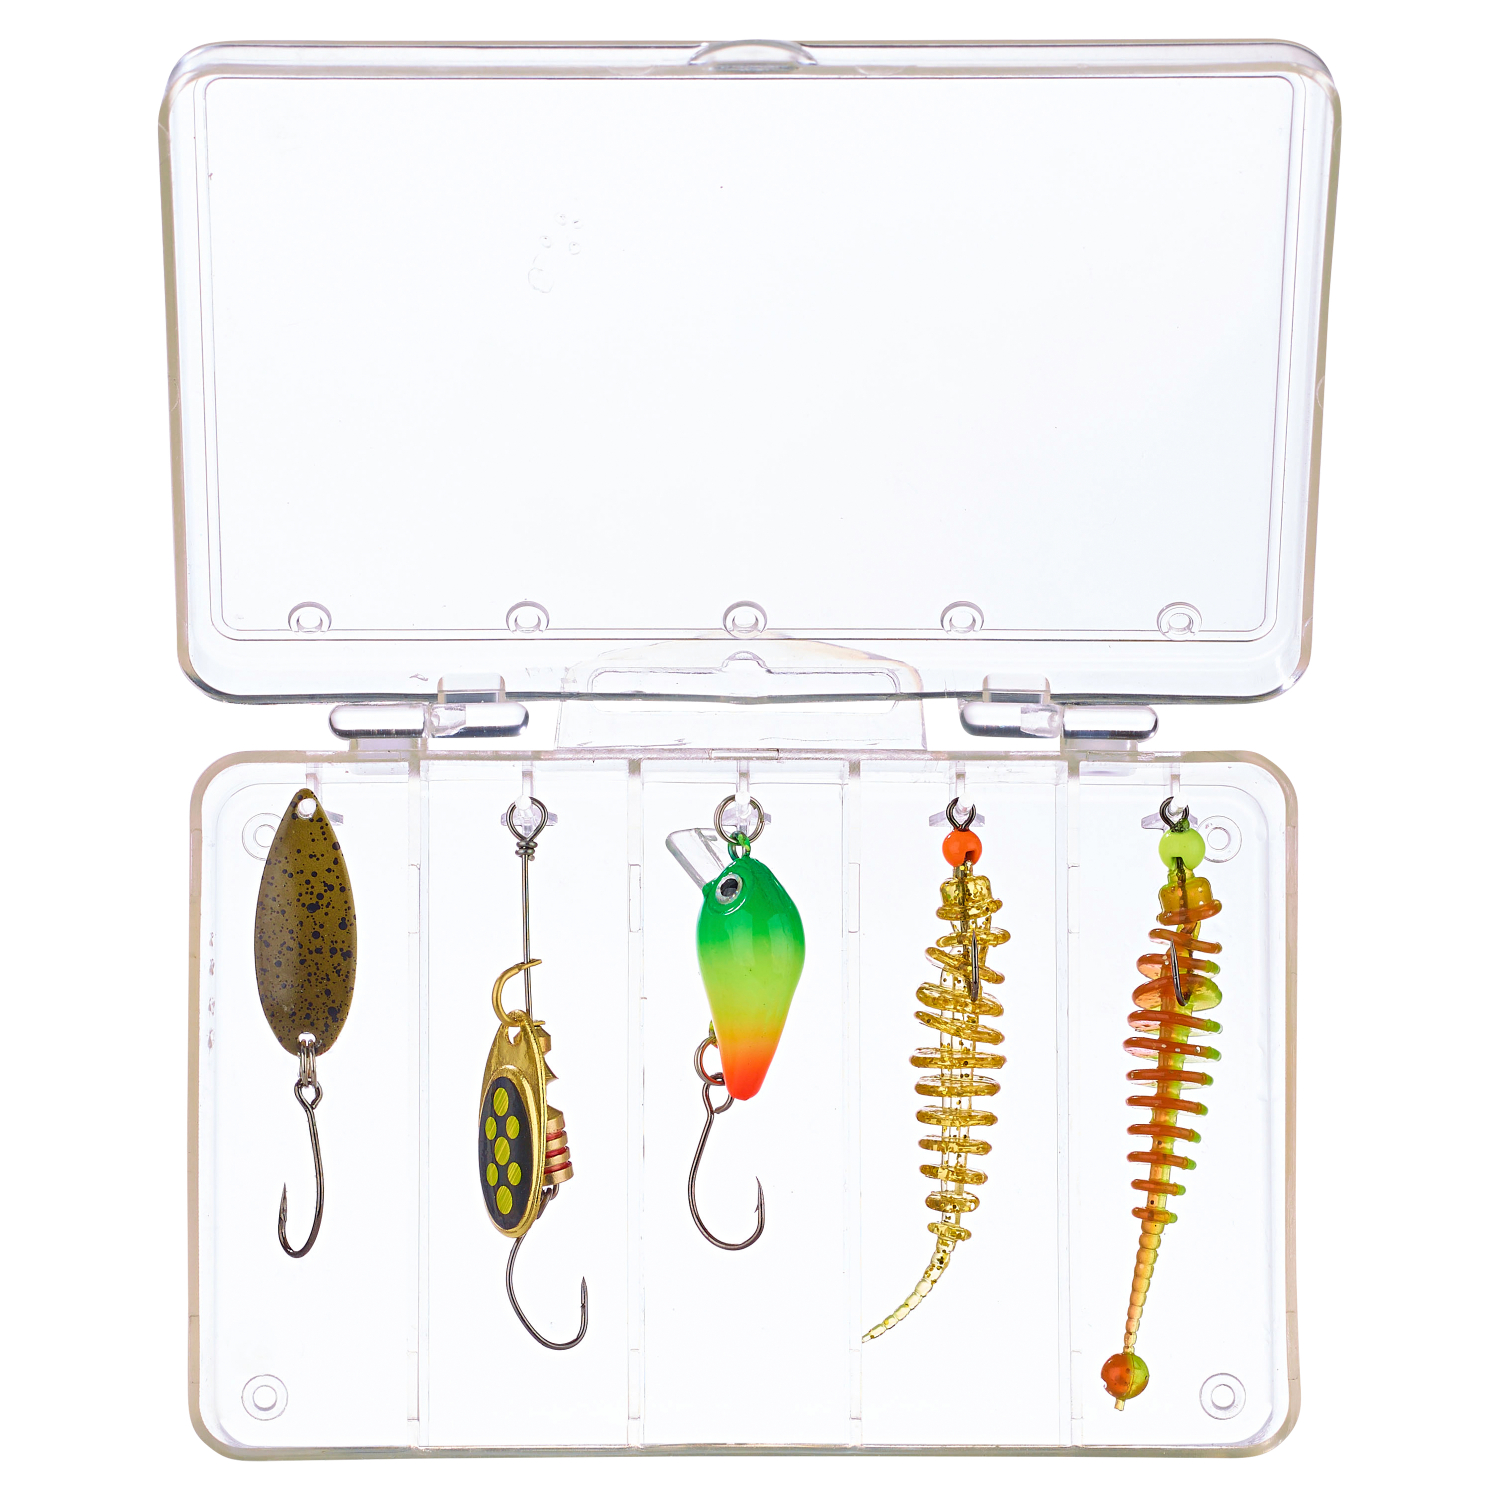 https://images.askari-sport.com/en/product/1/large/trout-attack-artificial-lure-sets-sunny-skyclear-water.jpg